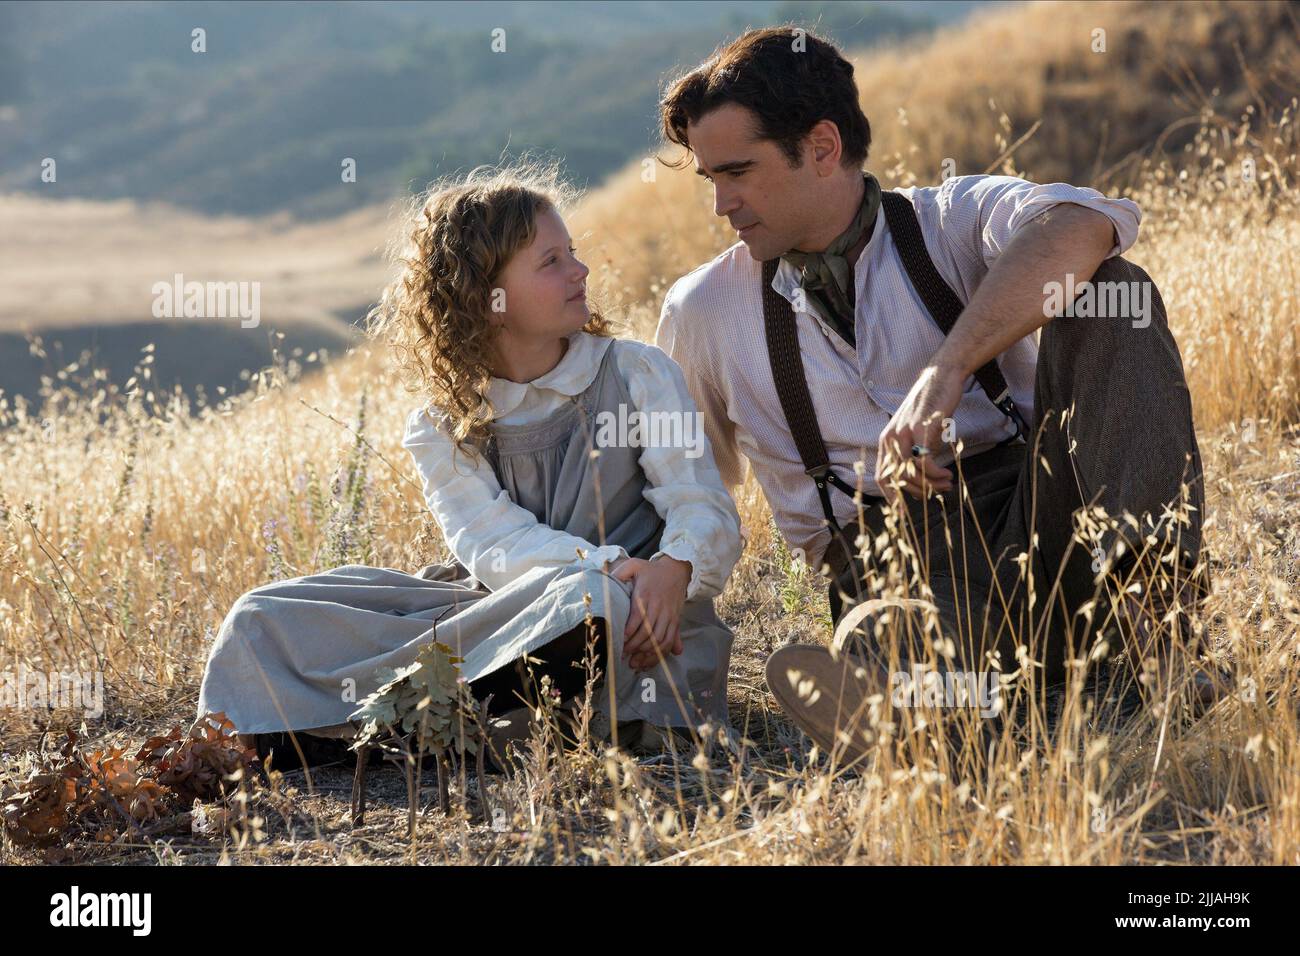 ANNIE ROSE BUCKLEY, COLIN FARRELL, SAVING MR. BANKS, 2013 Stock Photo